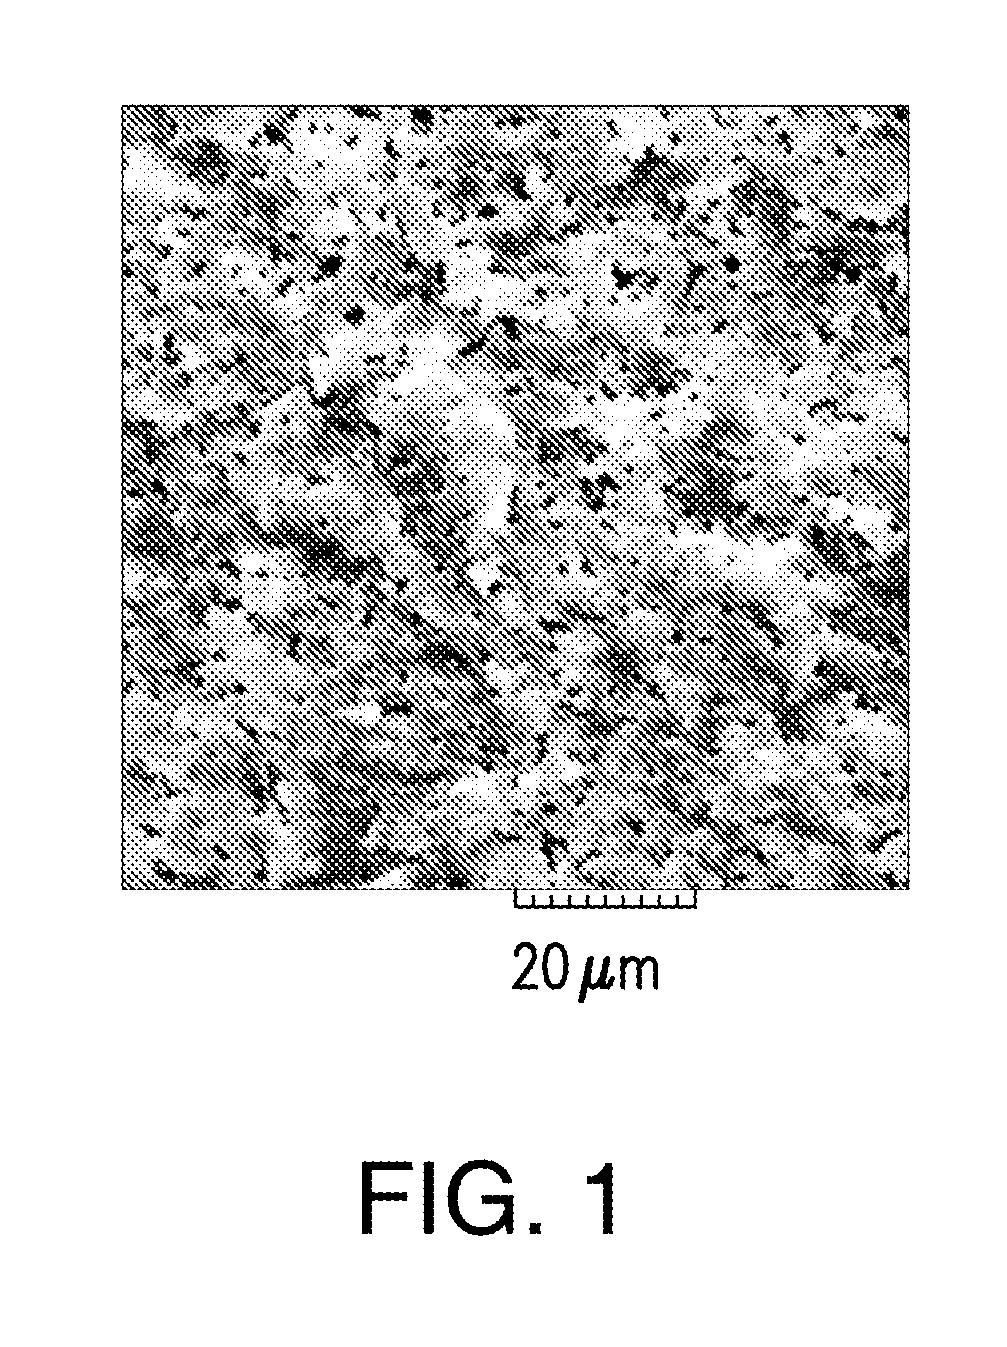 Ceramic Particles With Controlled Pore and/or Microsphere Placement and/or Size and Method Of Making Same